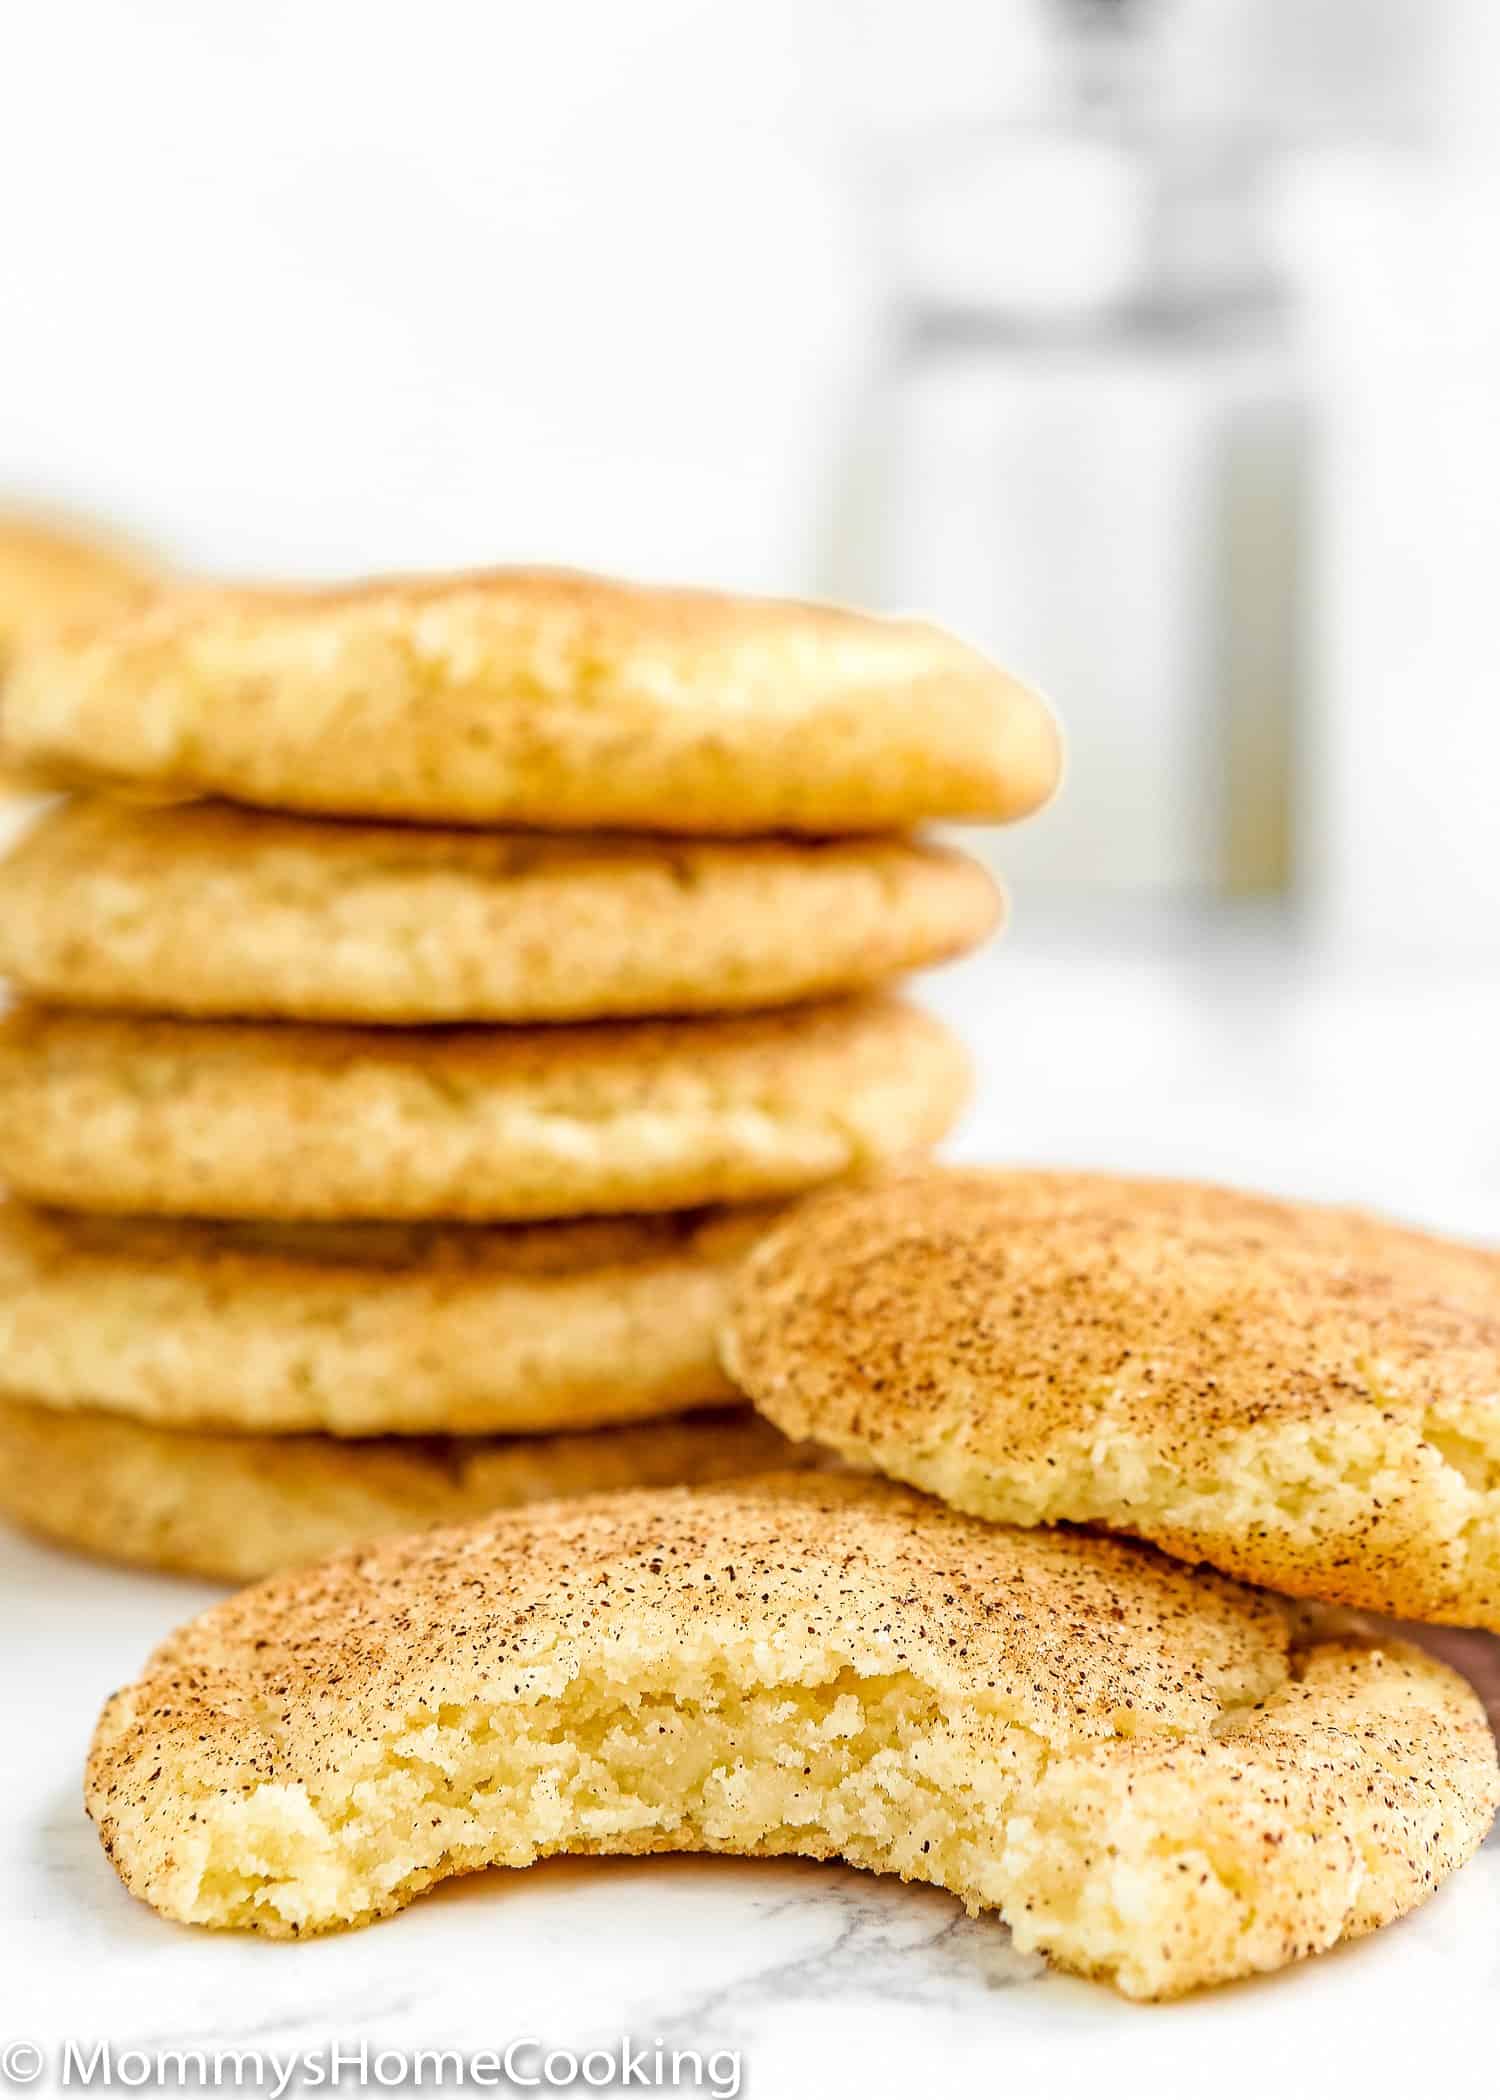 Eggless Snickerdoodle Cookie bitten showing the chewy inside texture